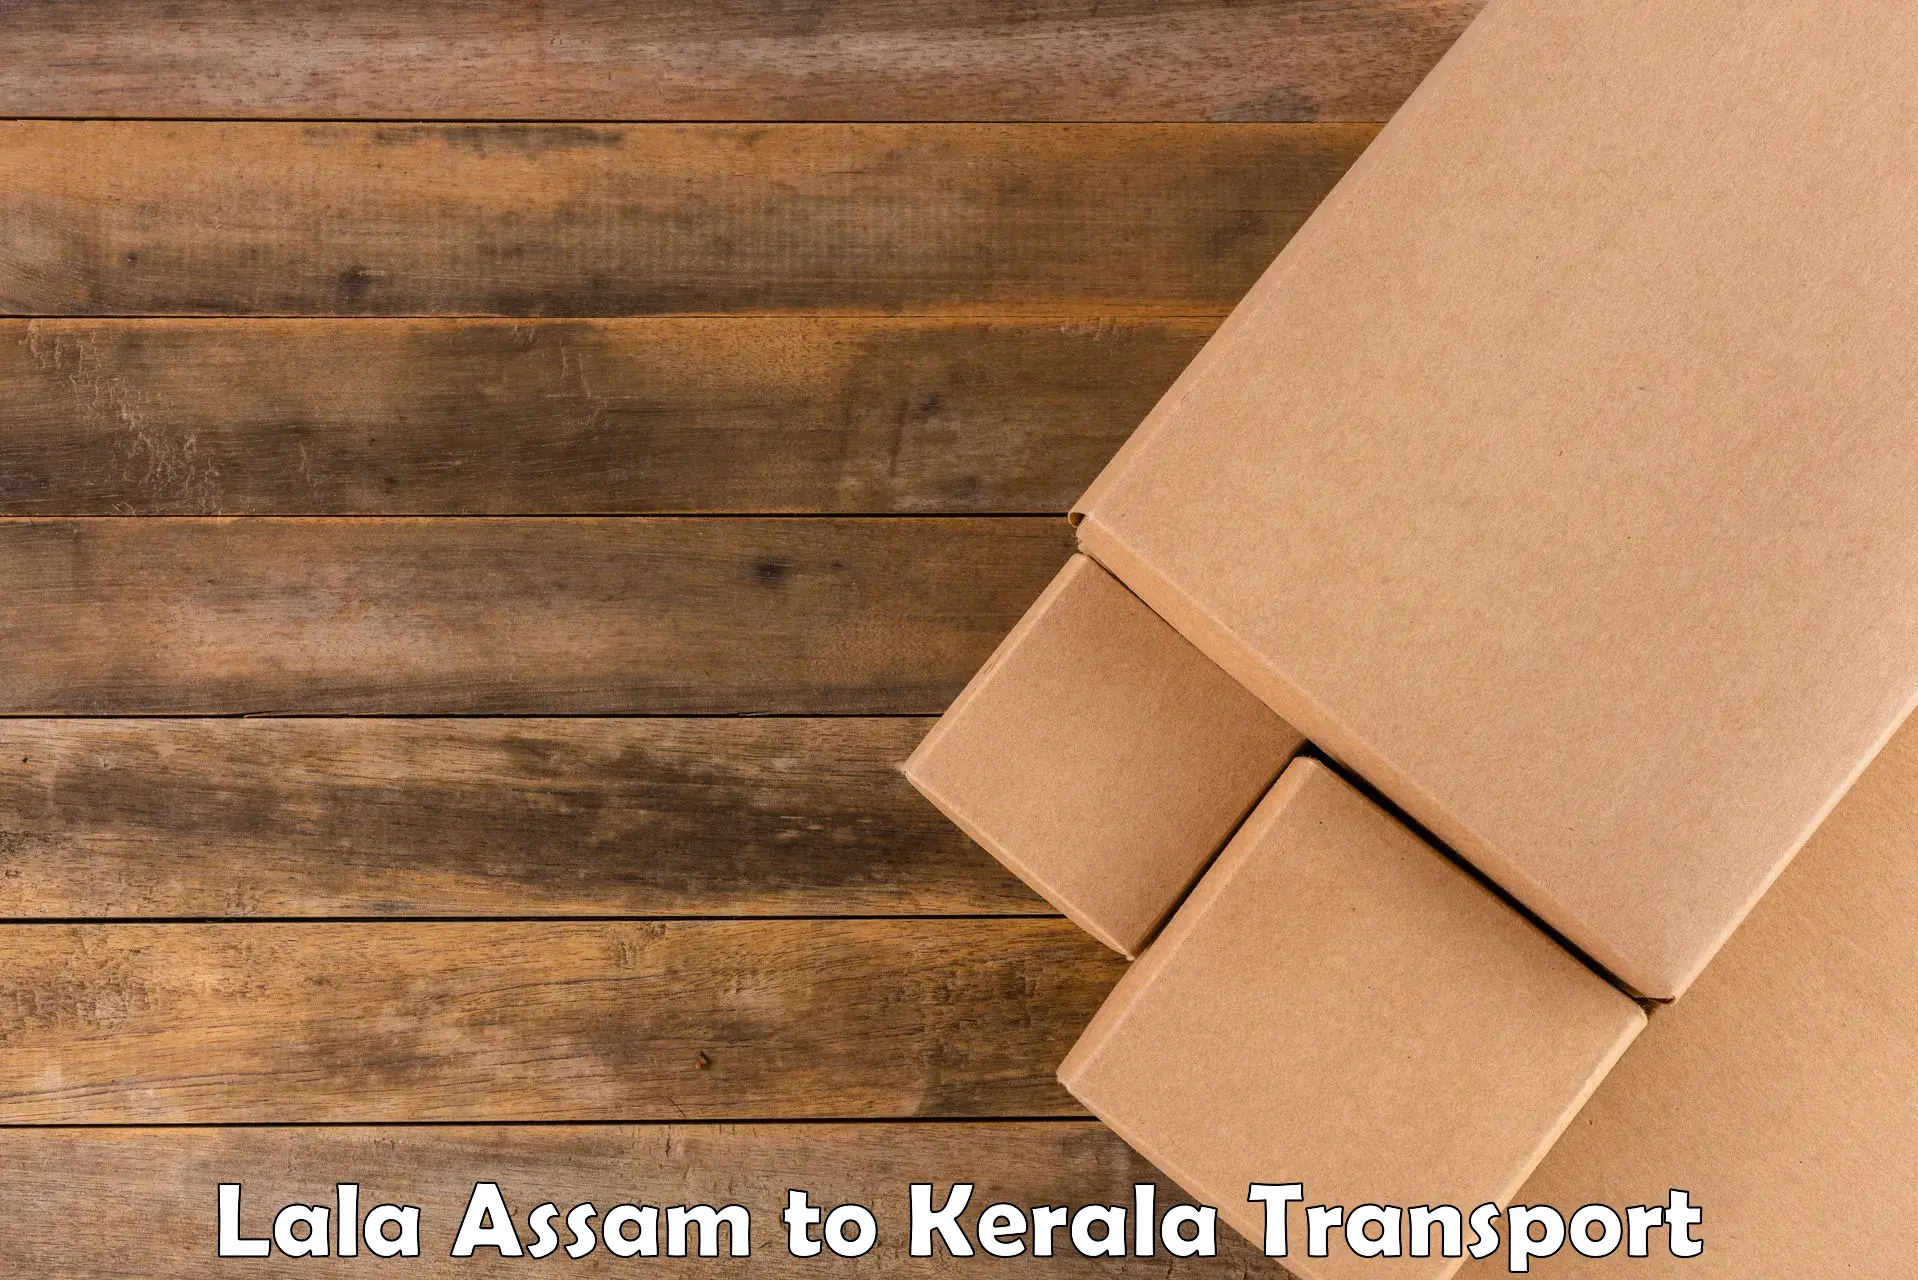 Express transport services Lala Assam to Chengannur